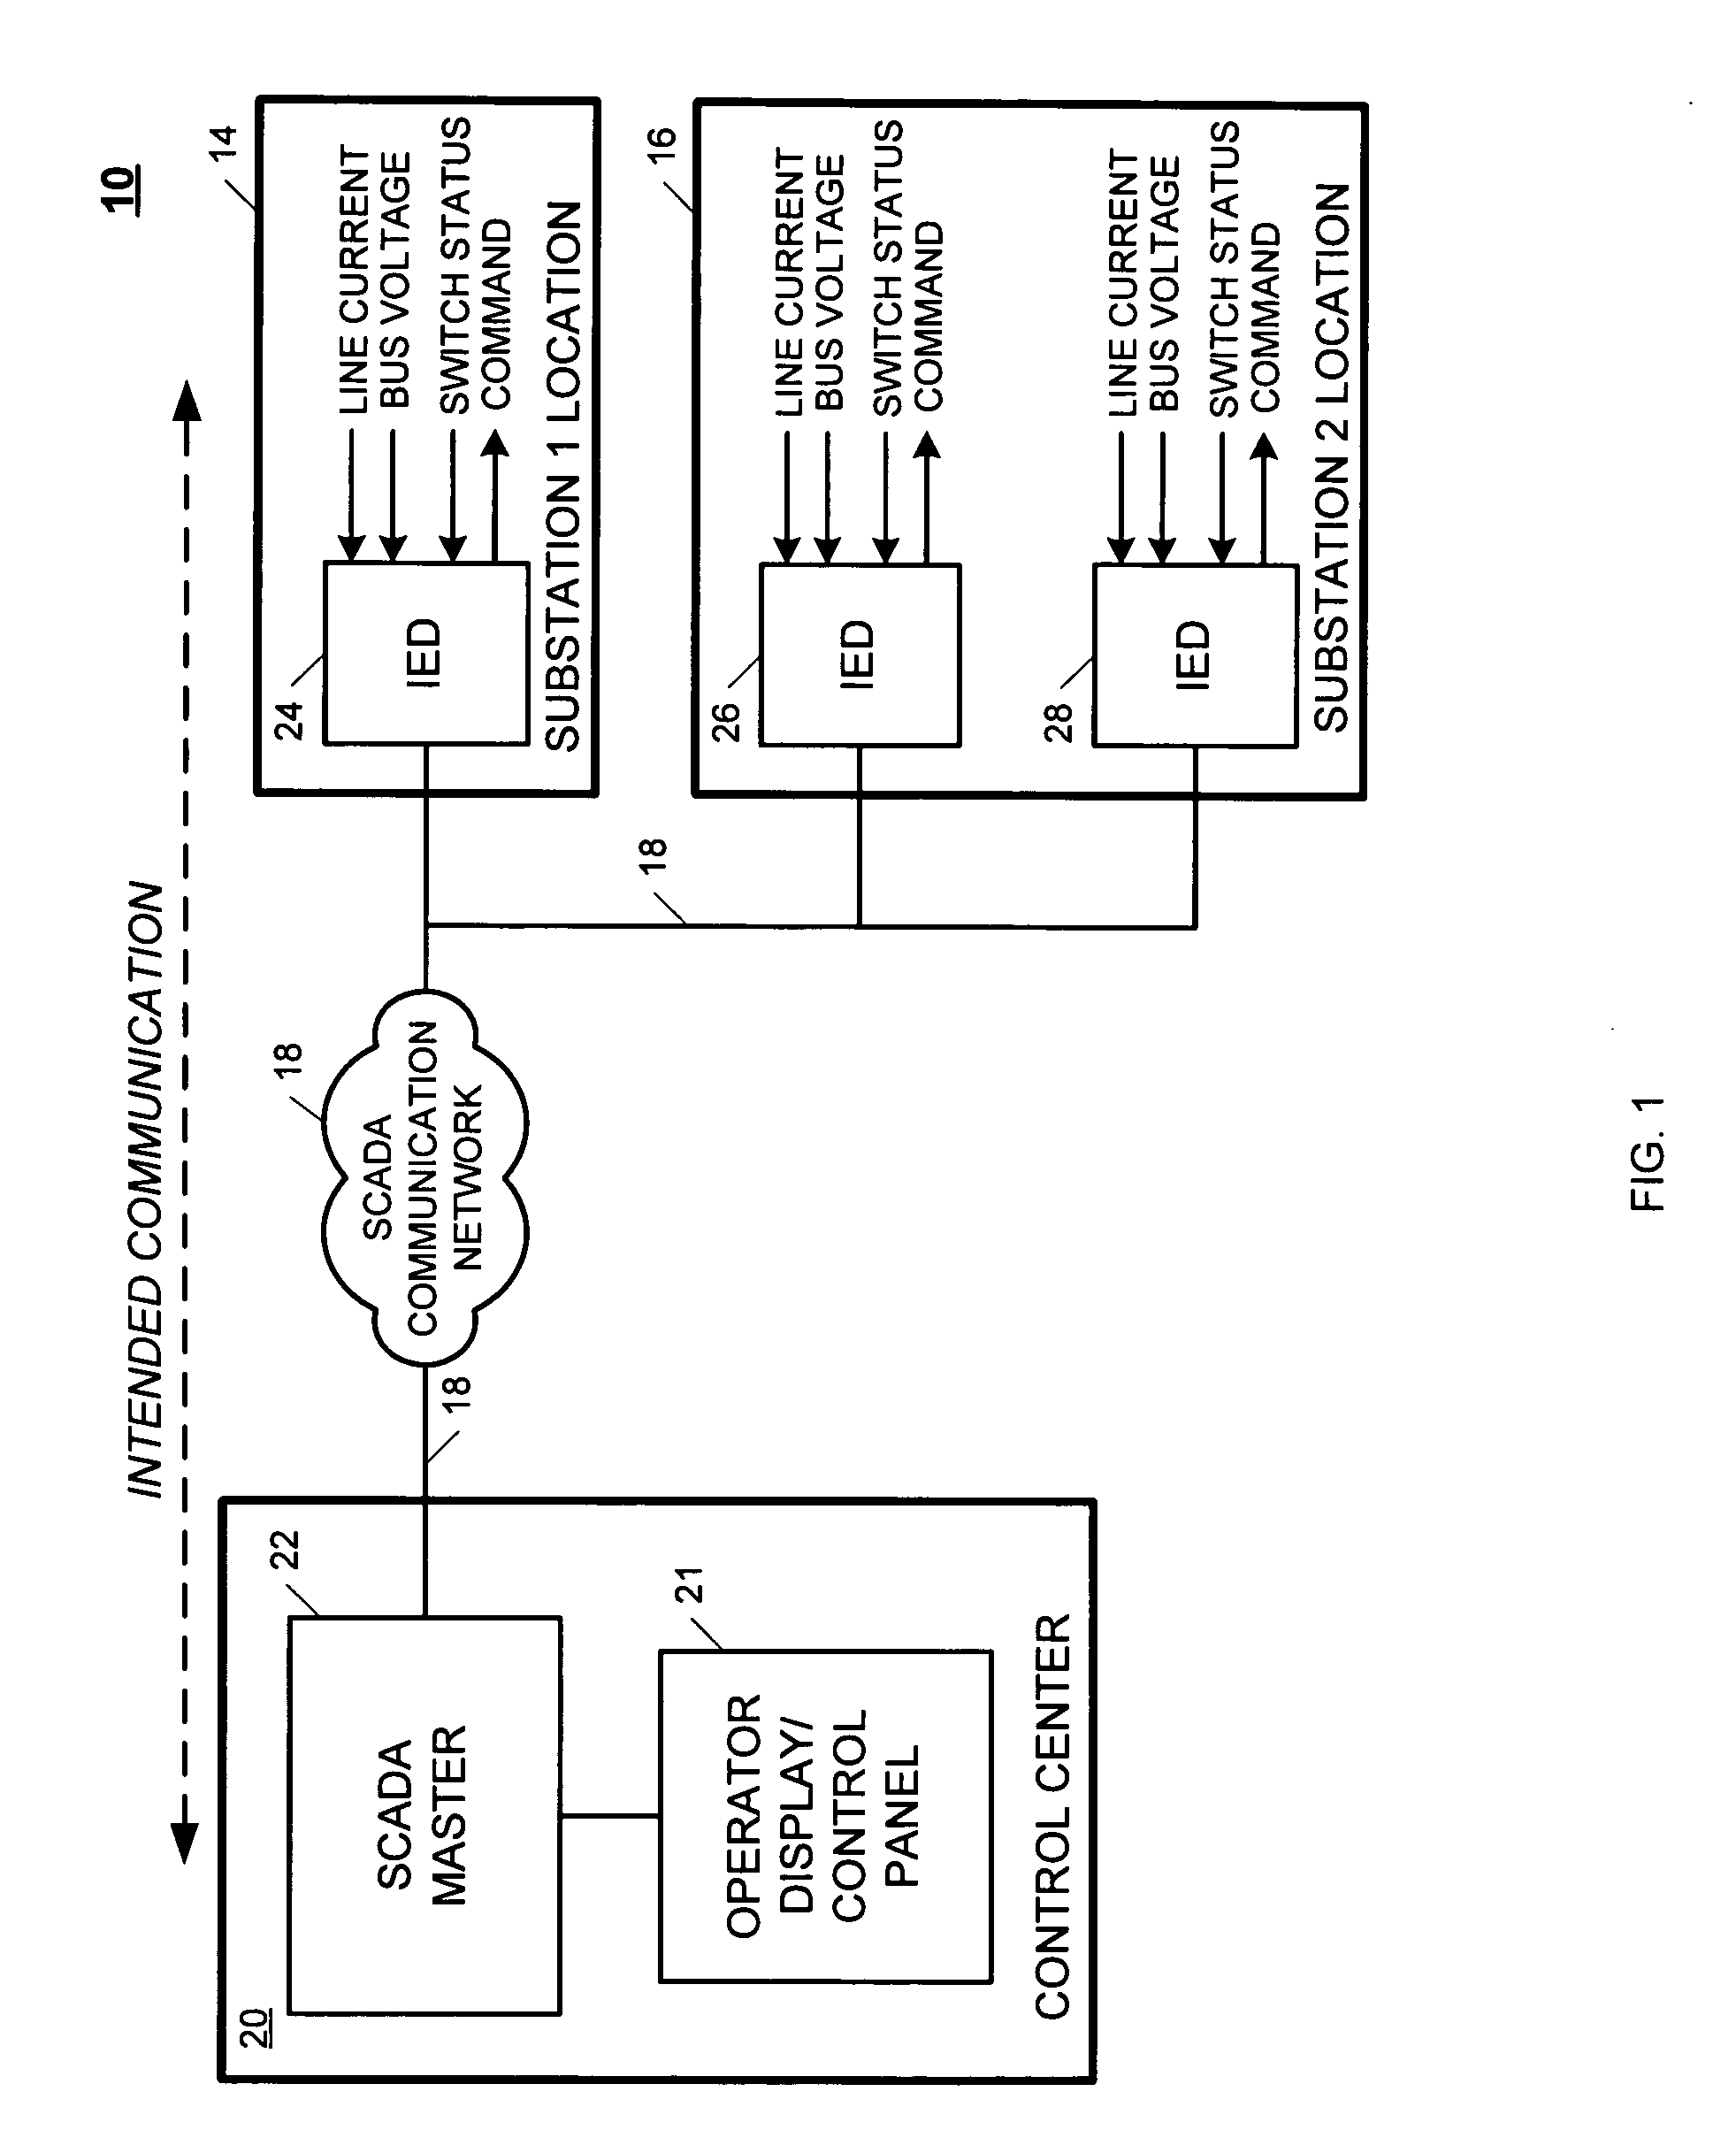 Method and apparatus for reducing communication system downtime when configuring a cryptographic system of the communication system